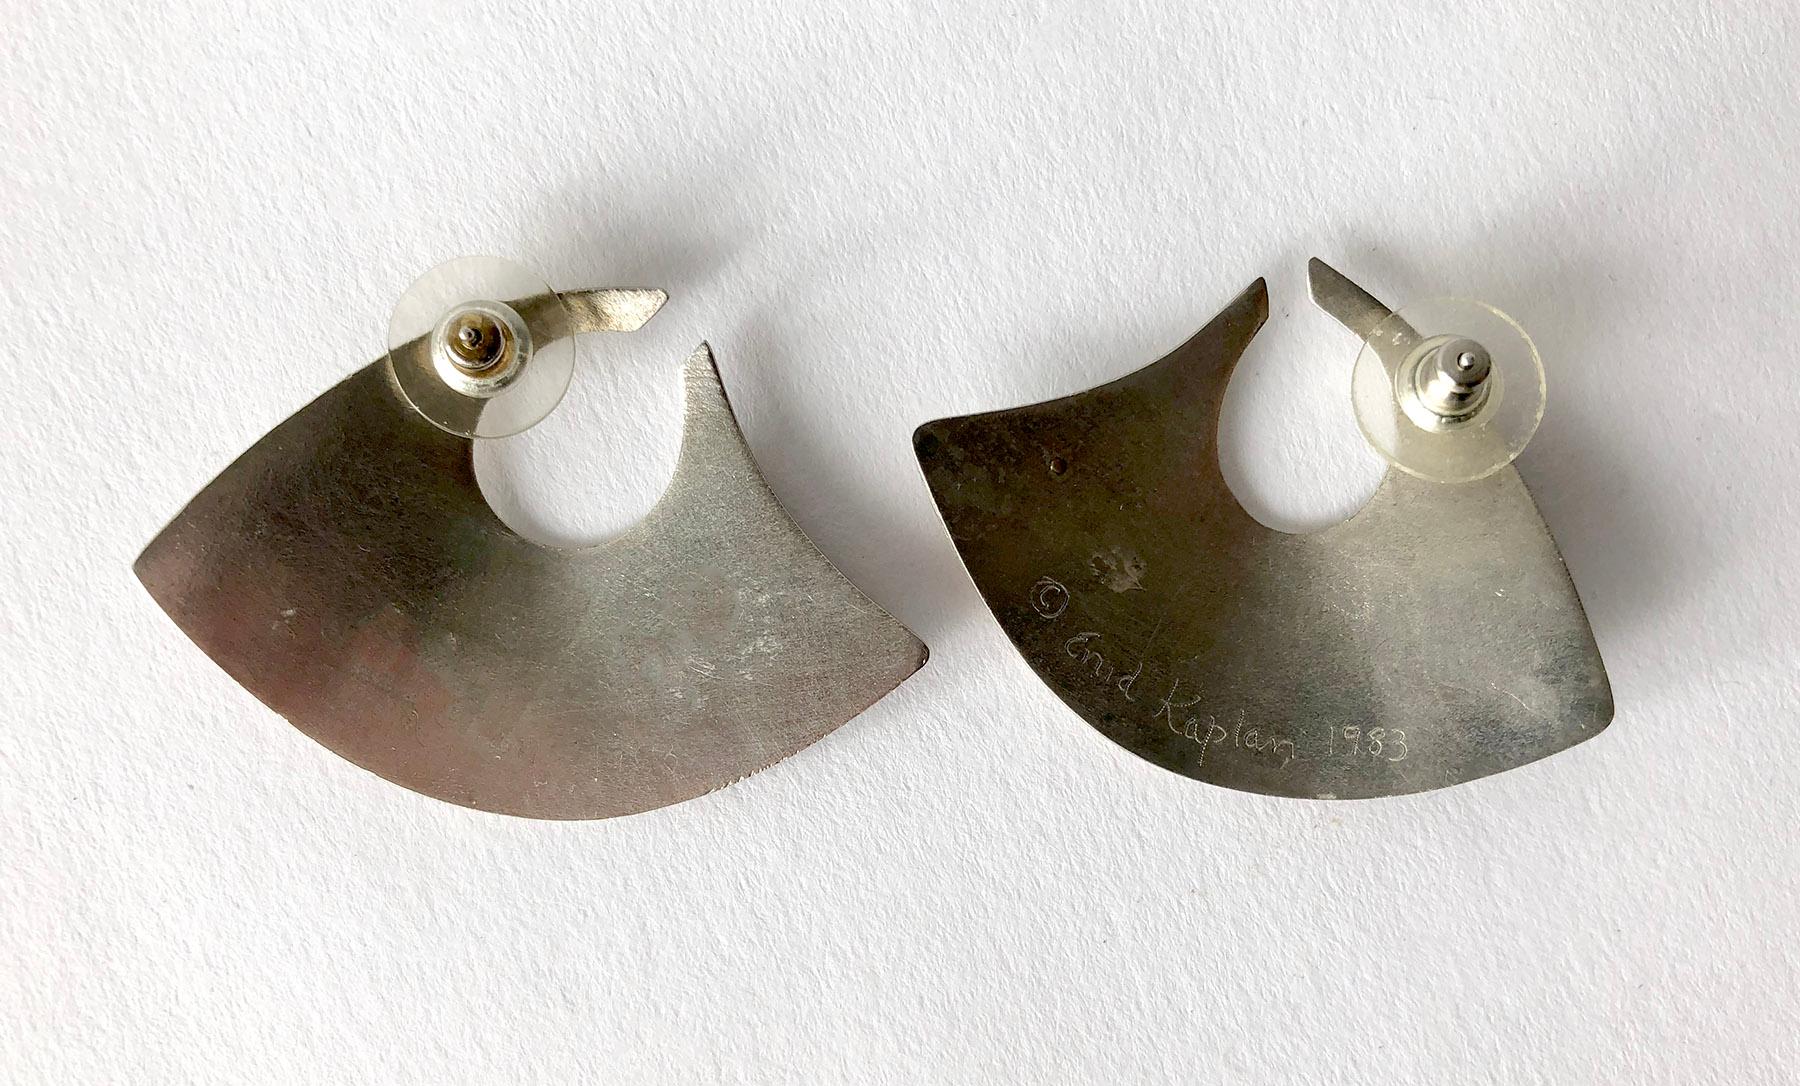 Married metals post modernist earrings of sterling silver, 14k gold and brass with onyx accent, created by artist and jeweler Enid Kaplan of New York City.  Earrings measure 1 1/4